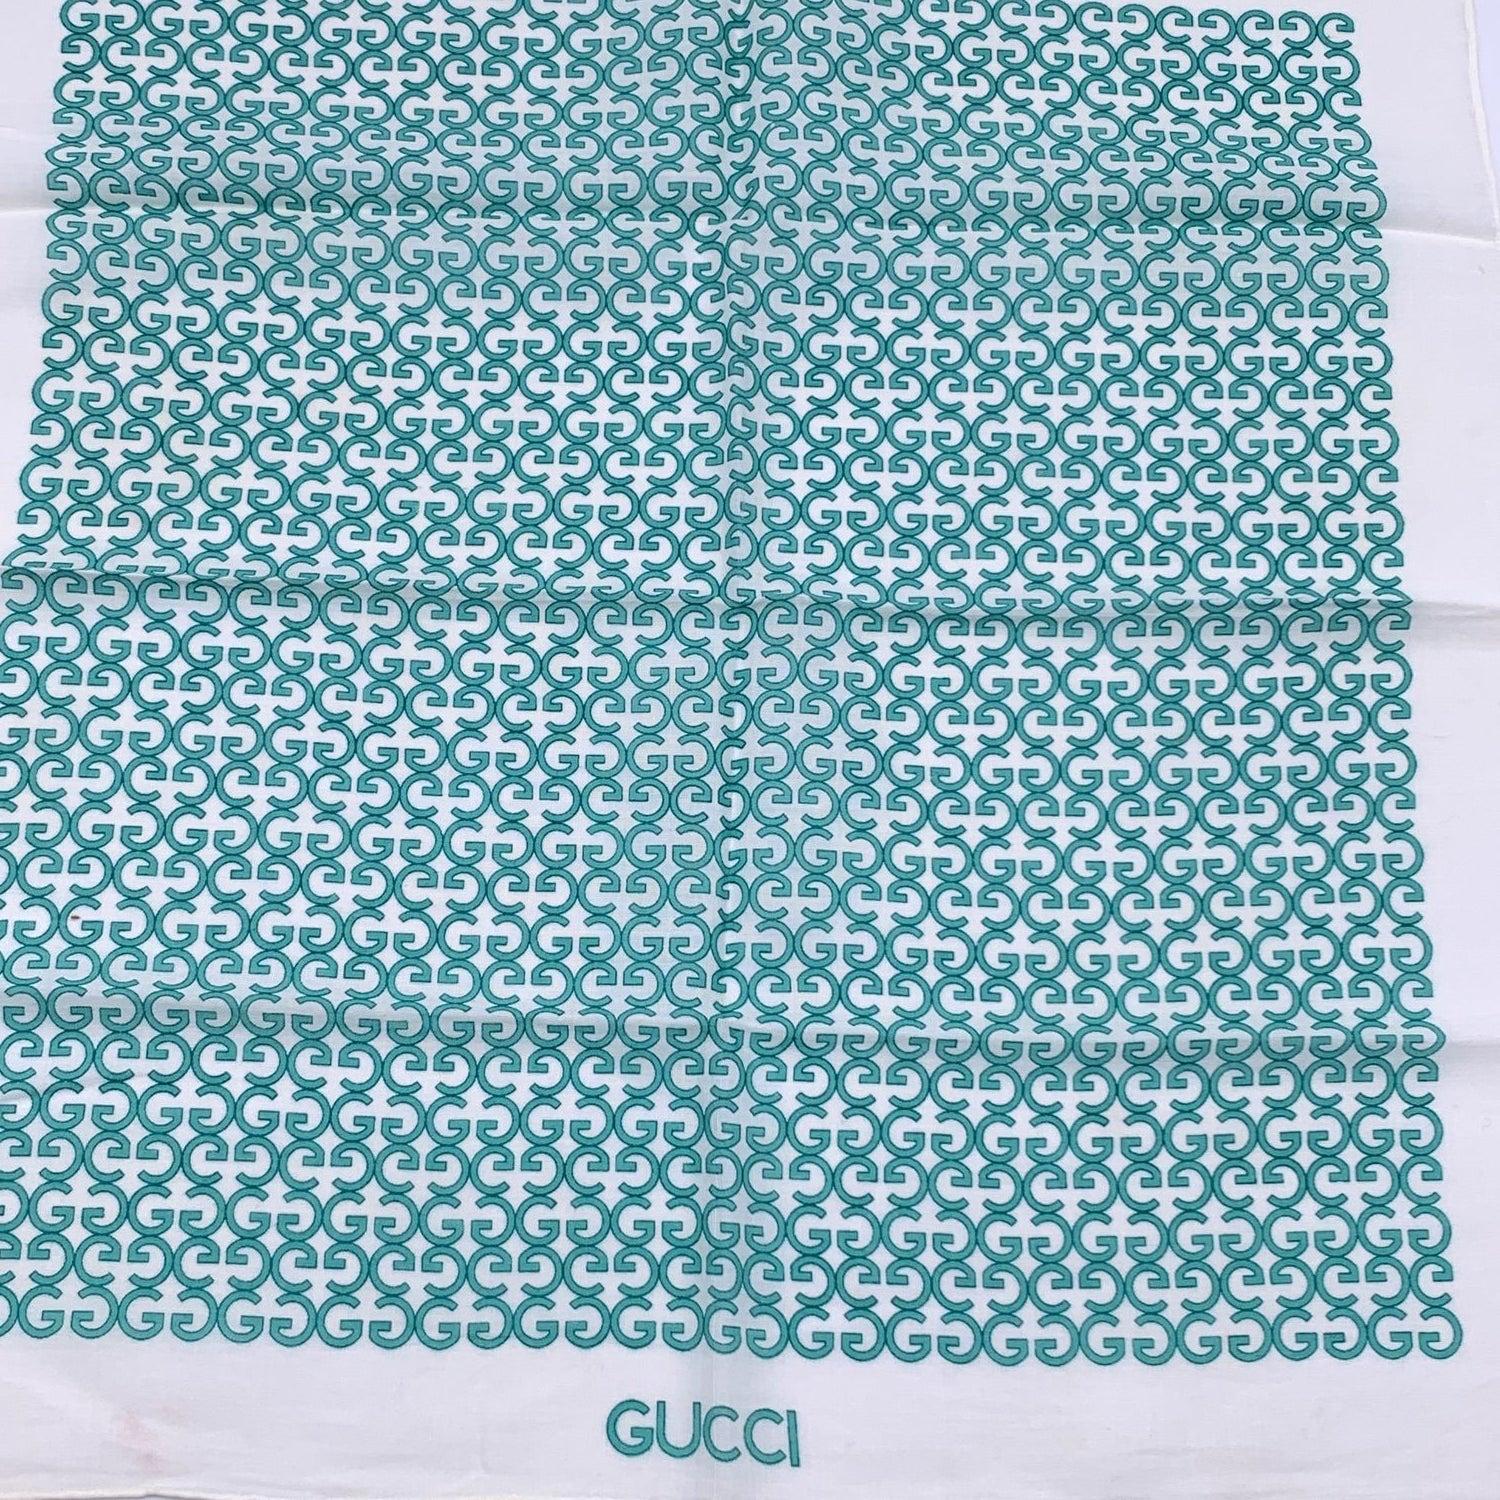 Vintage neck scarf by GUCCI. 100% Cotton. Green GG logo pattern with white borders. 'Gucci' signature printed on the lower center border. Approx. Measurements: 16.5 x 17 inches - 41.9 x 43.2 cm Details MATERIAL: Cotton COLOR: Green MODEL: n.a.